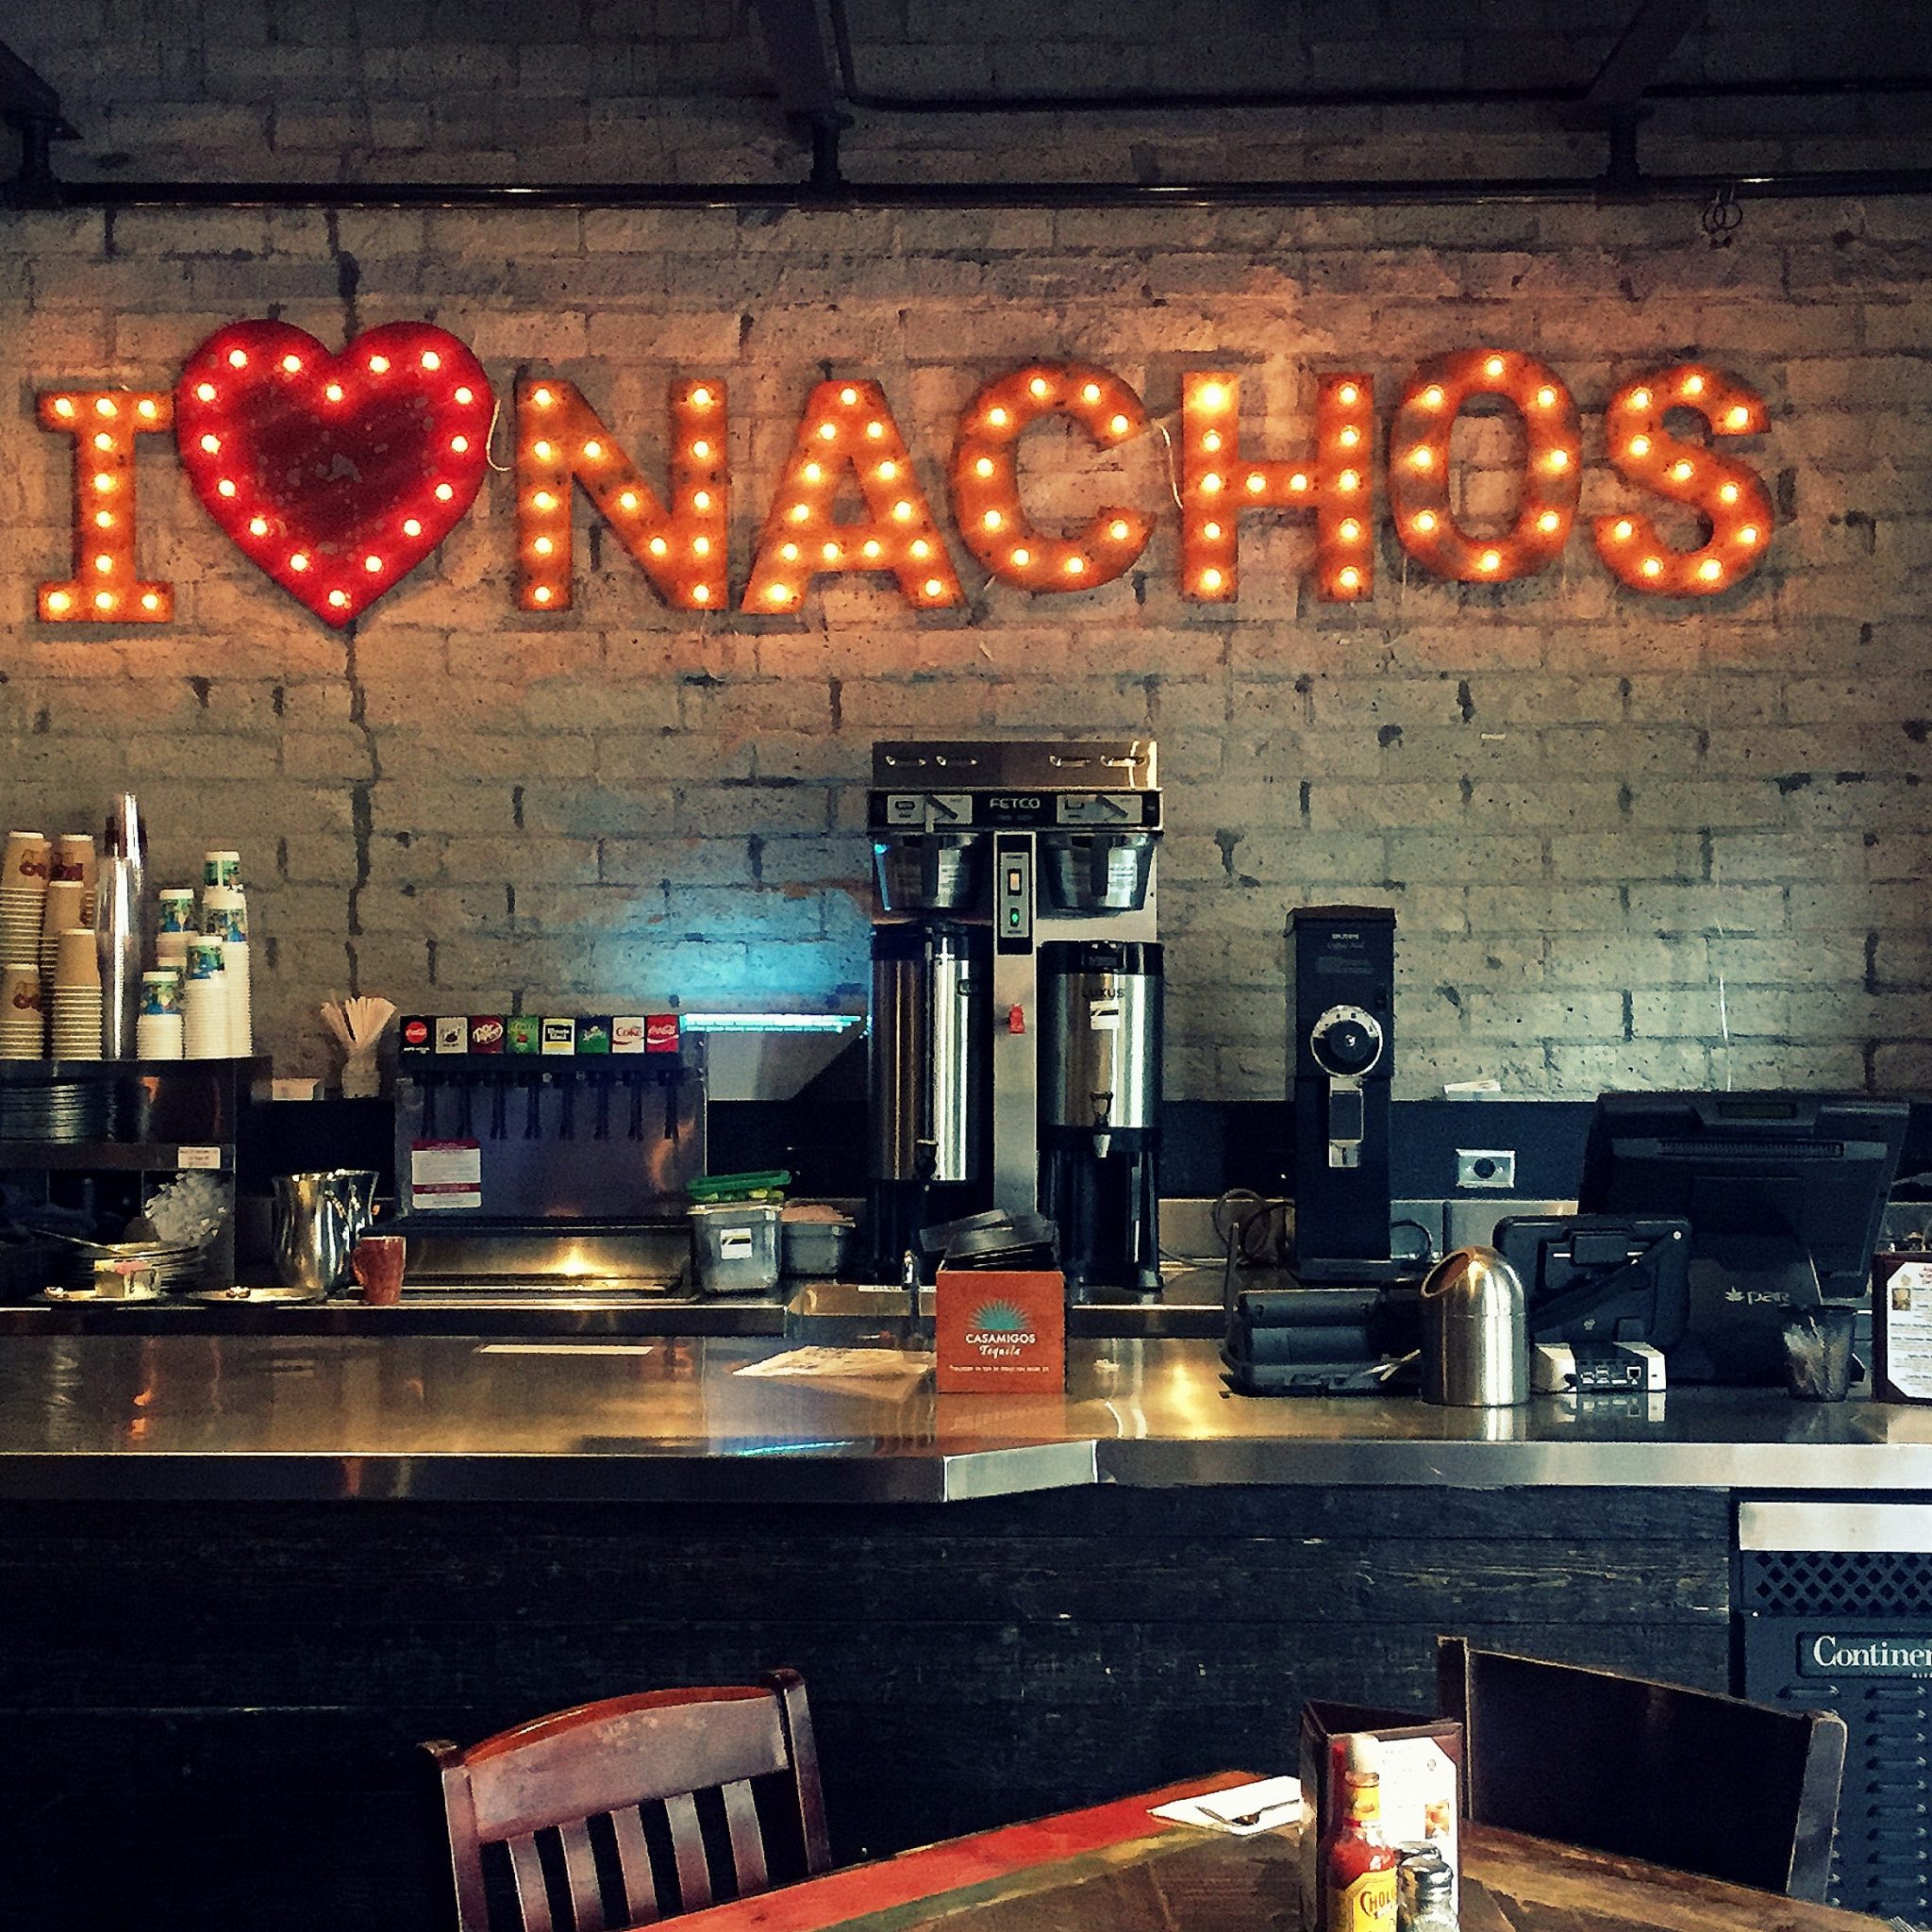 Plant based nachos done right - Nacho Daddy is a must stop for vegan Mexican classics.